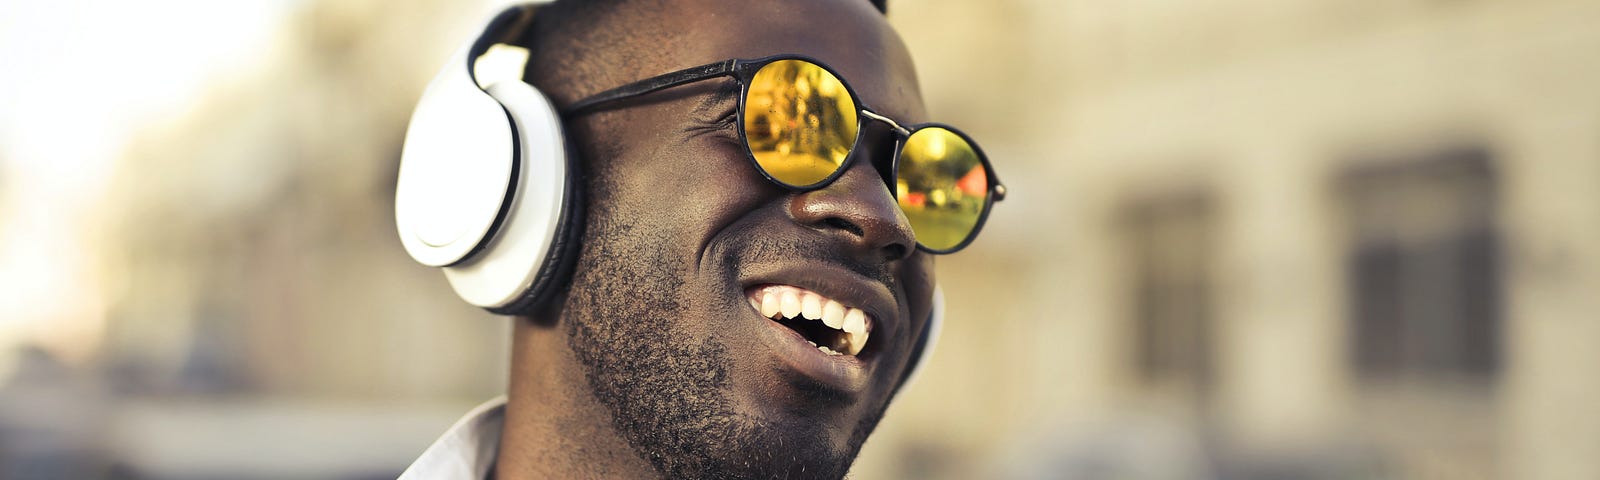 Photograph of black man wearing white headphones and white shirt, smiling with mouth open and wearing yellow tinted sunglasses. Blurred buildings and cars in background. Feeling of happiness.